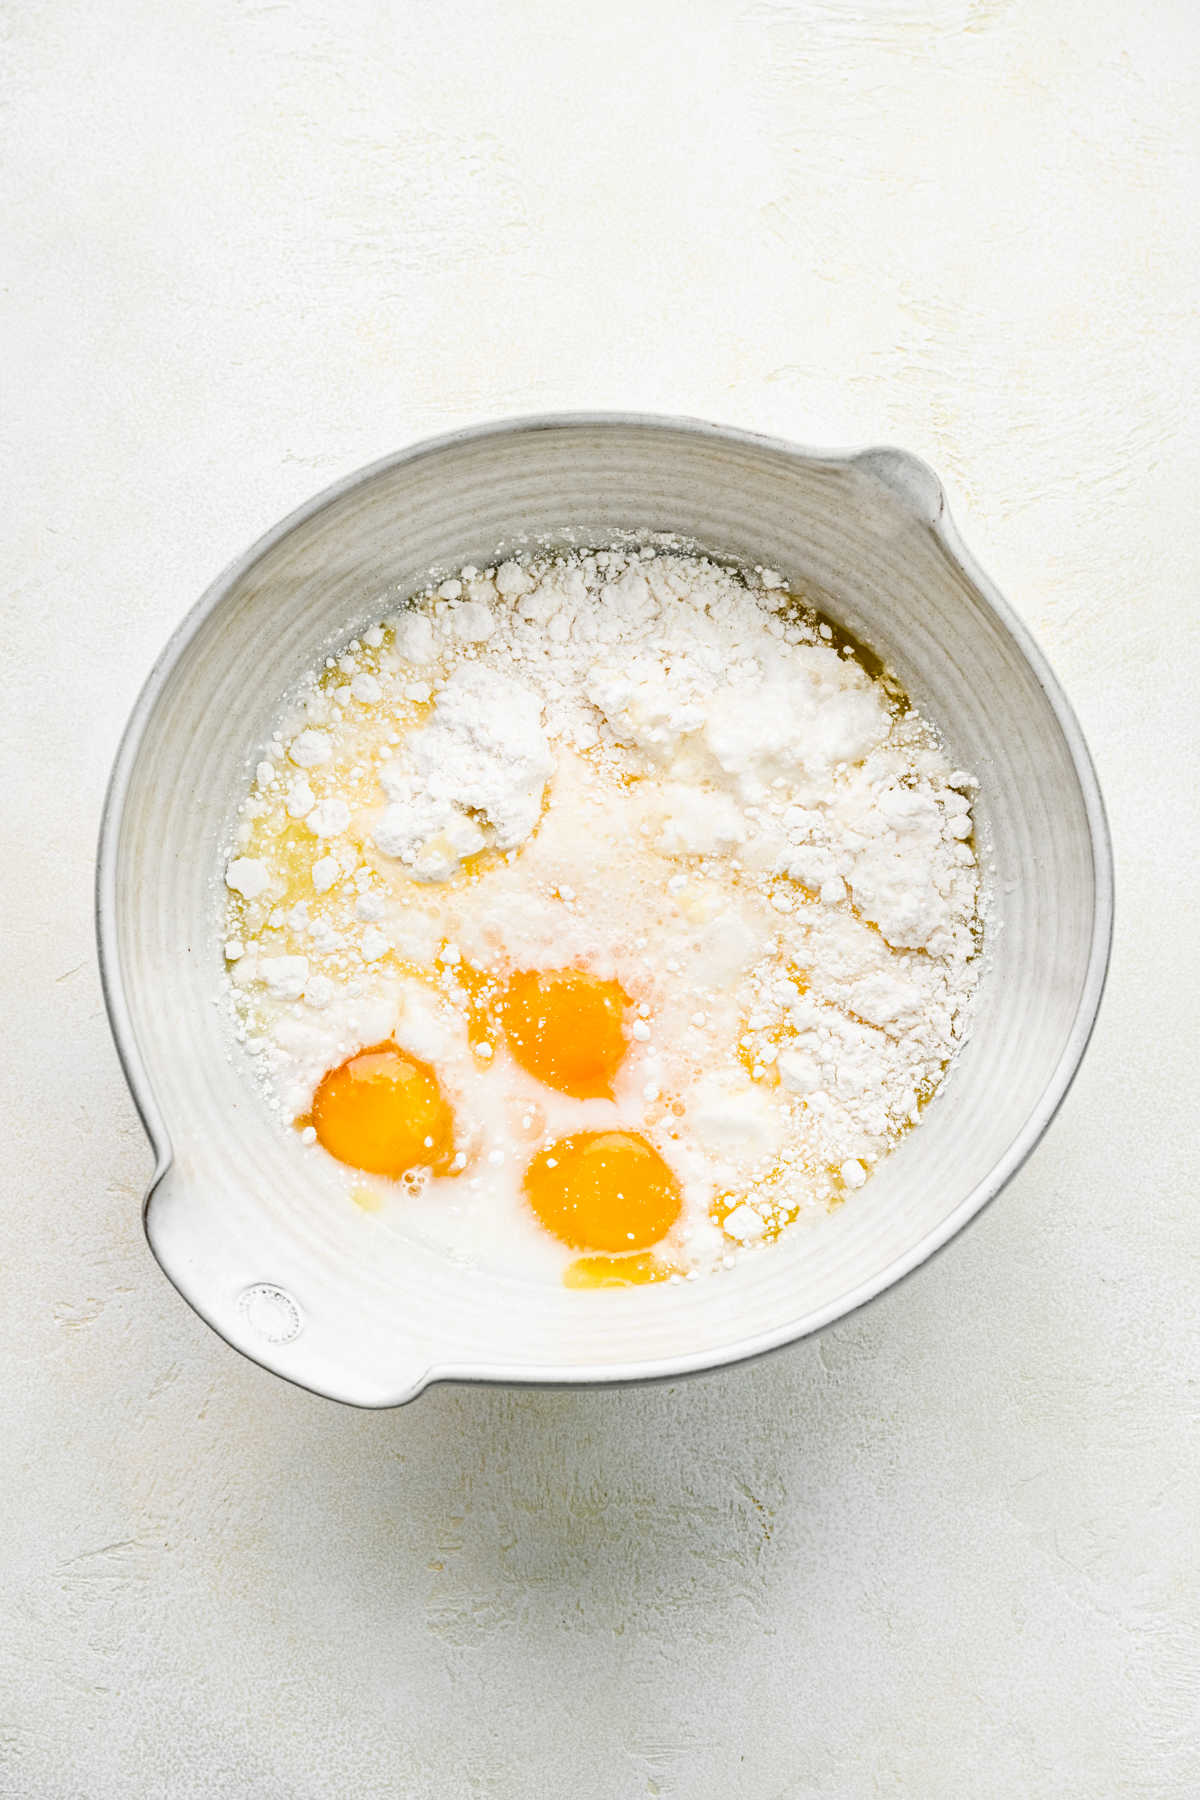 Cake mix, eggs, water, and milk in a ceramic mixing bowl. 